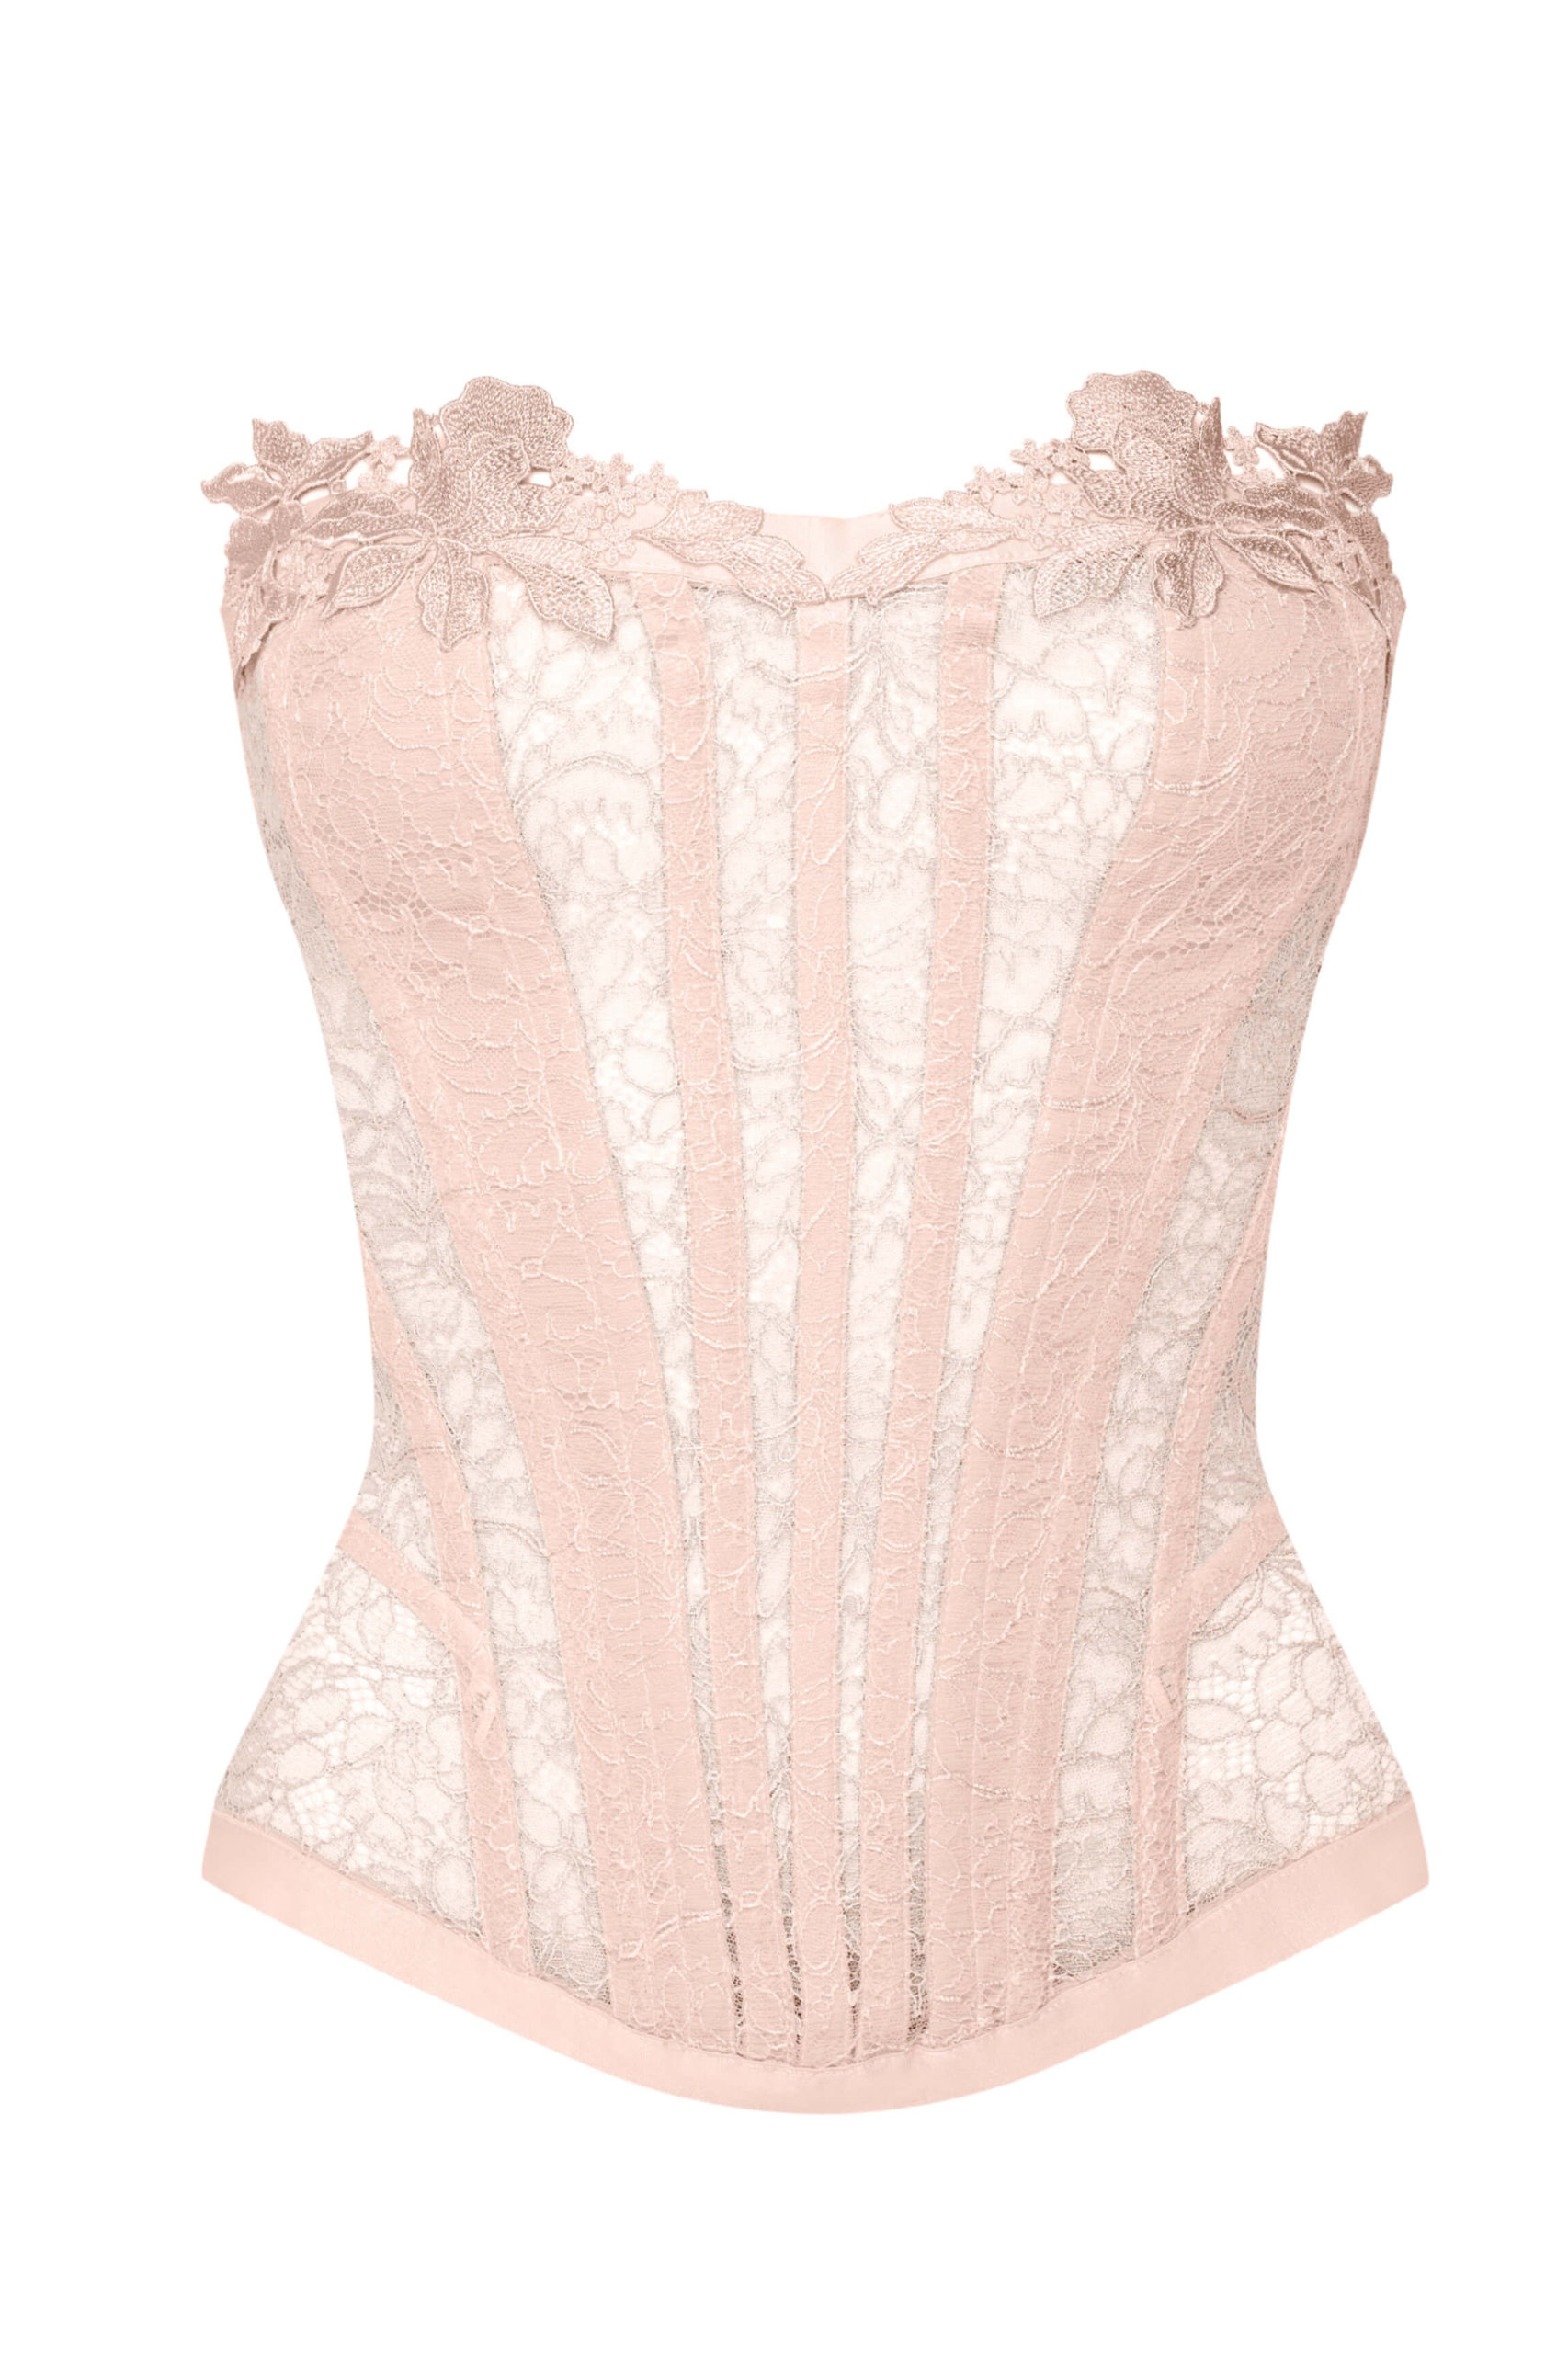 Queenral Corset Bustier Lingerie Sleepwear Push Up Sexy White Lace